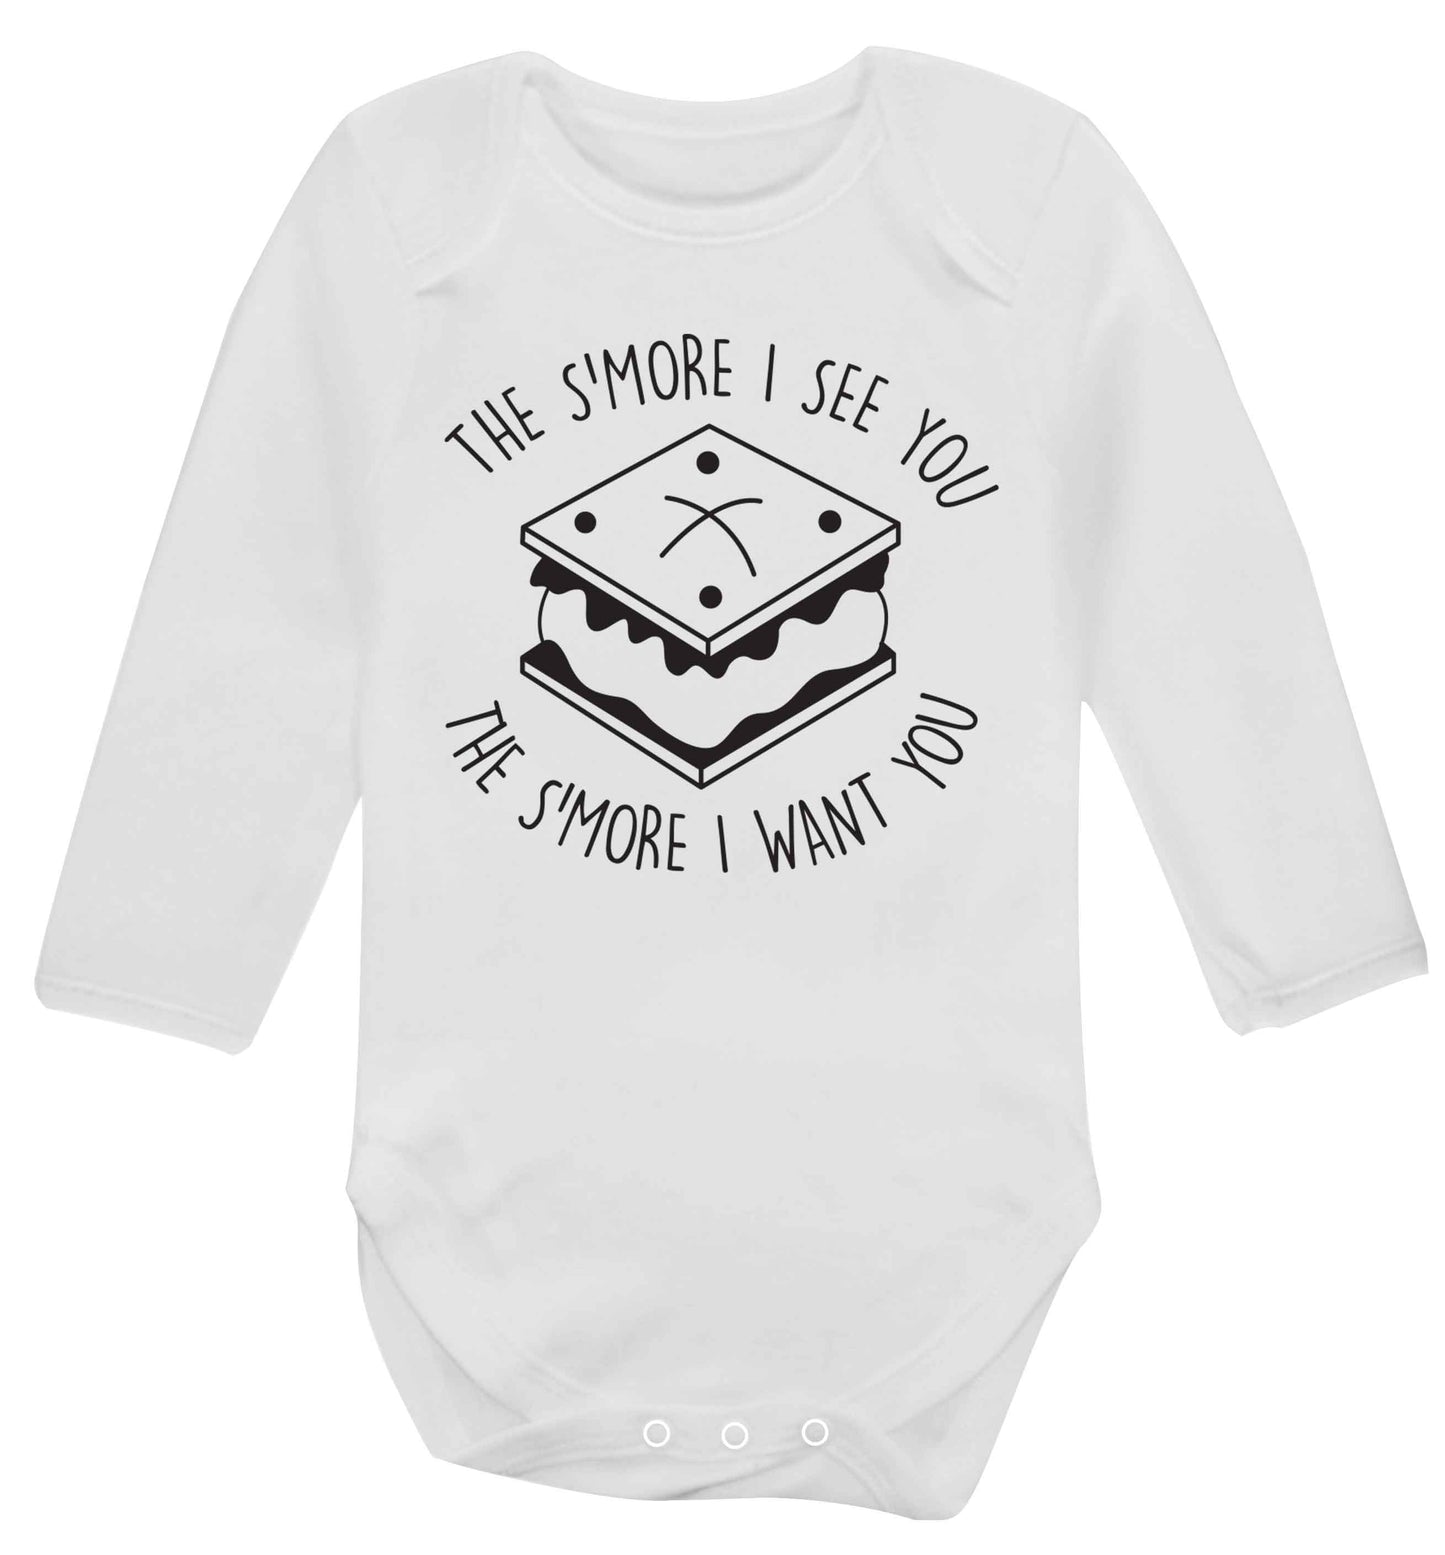 The s'more I see you the s'more I want you Baby Vest long sleeved white 6-12 months